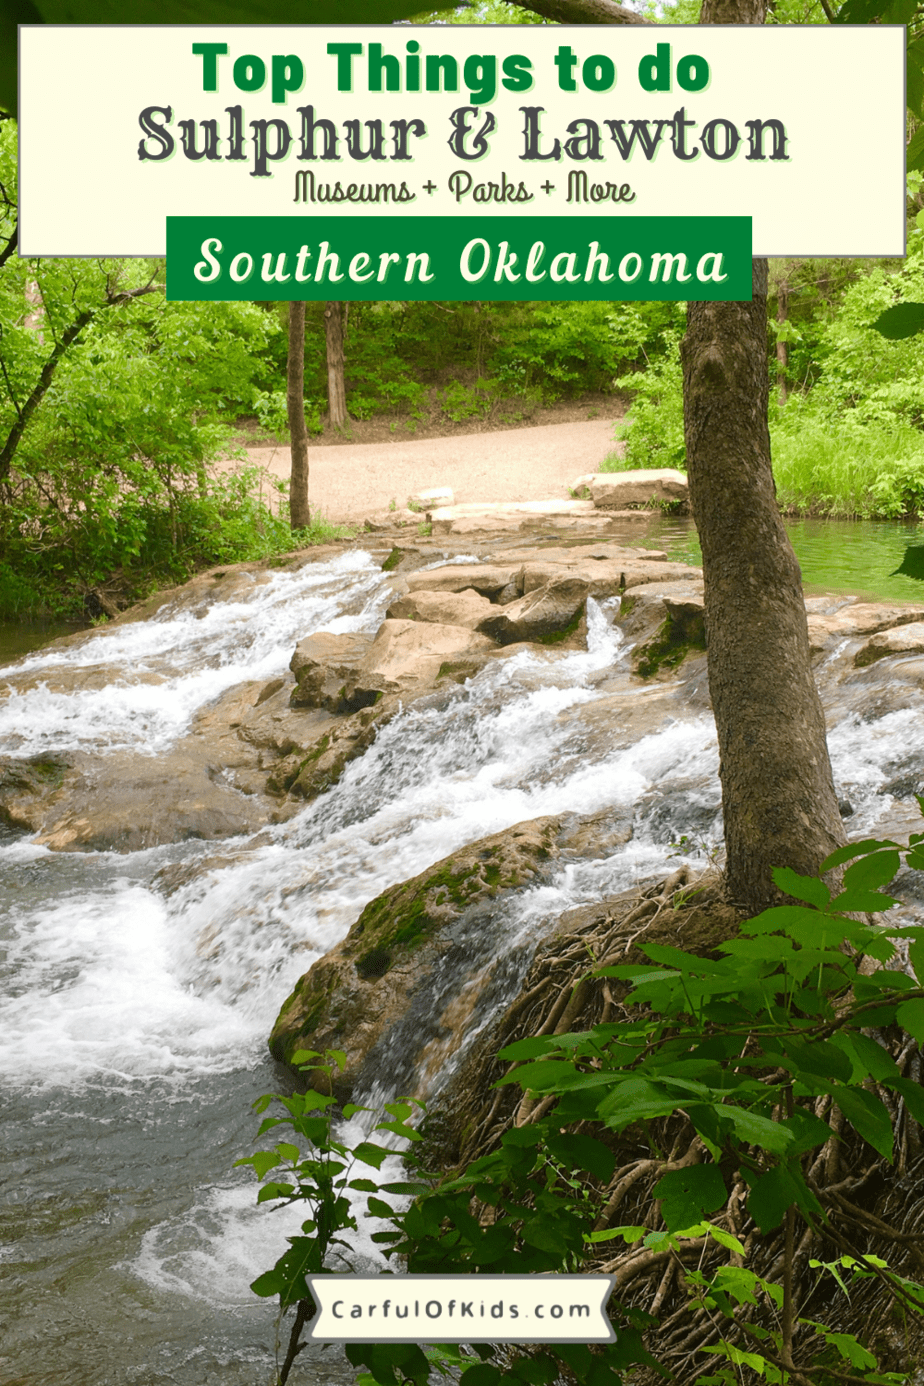 With 11 different places to explore in Southern Oklahoma, plan a getaway to Sulphur, Lawton or the Chickasaw National Recreation Area. Find a chocolate factory, national pool, a recreational lake and more.  What to do in Southern Oklahoma | museums and attractions in Southern Oklahoma #Oklahoma 